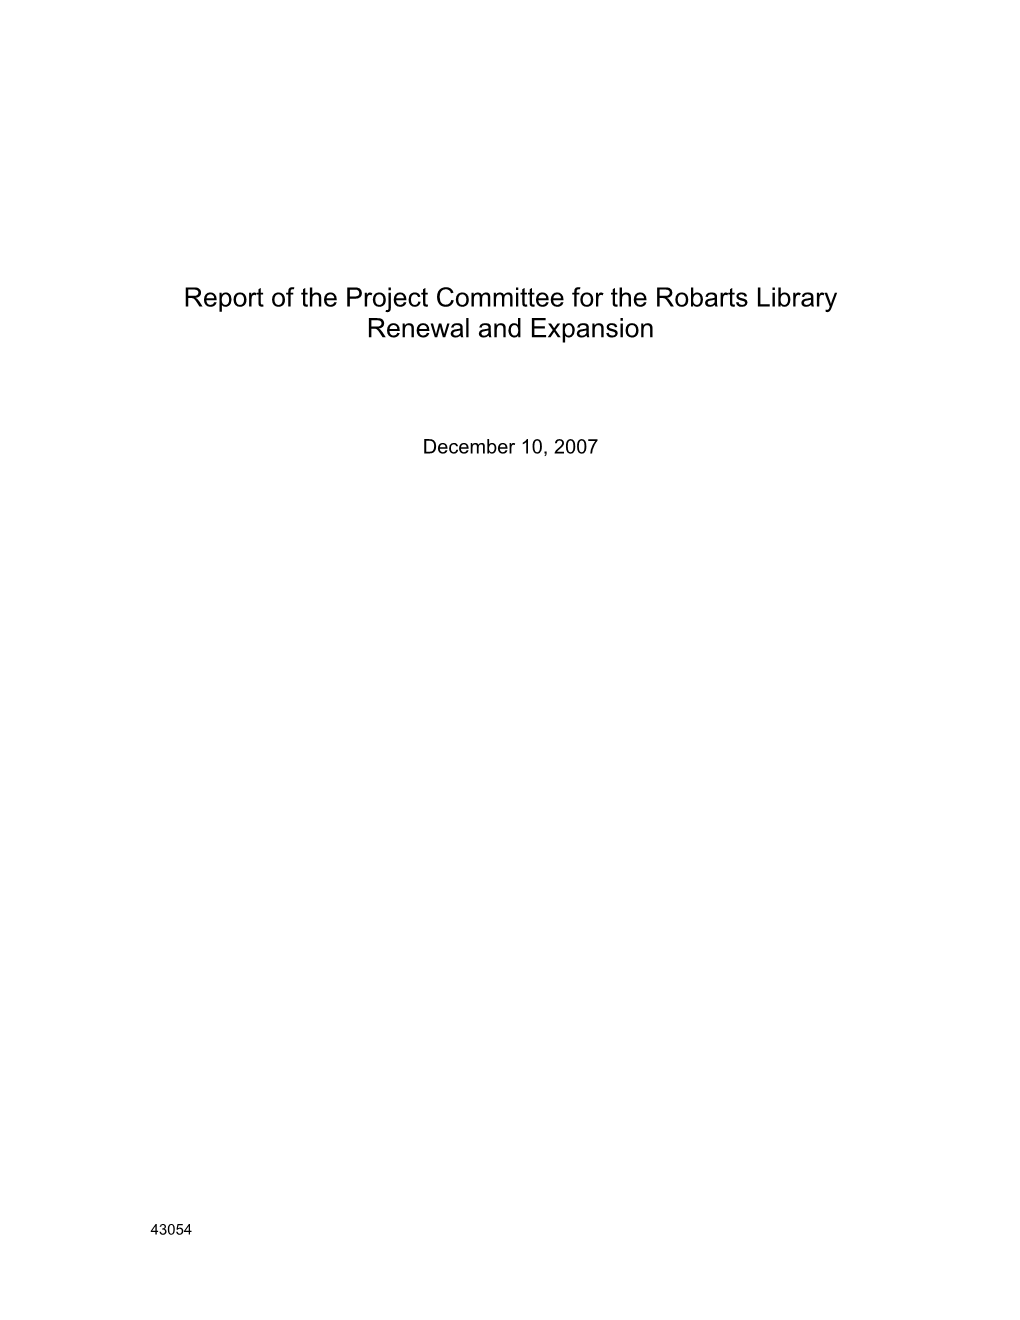 Report of the Project Committee for the Robarts Library Renewal and Expansion